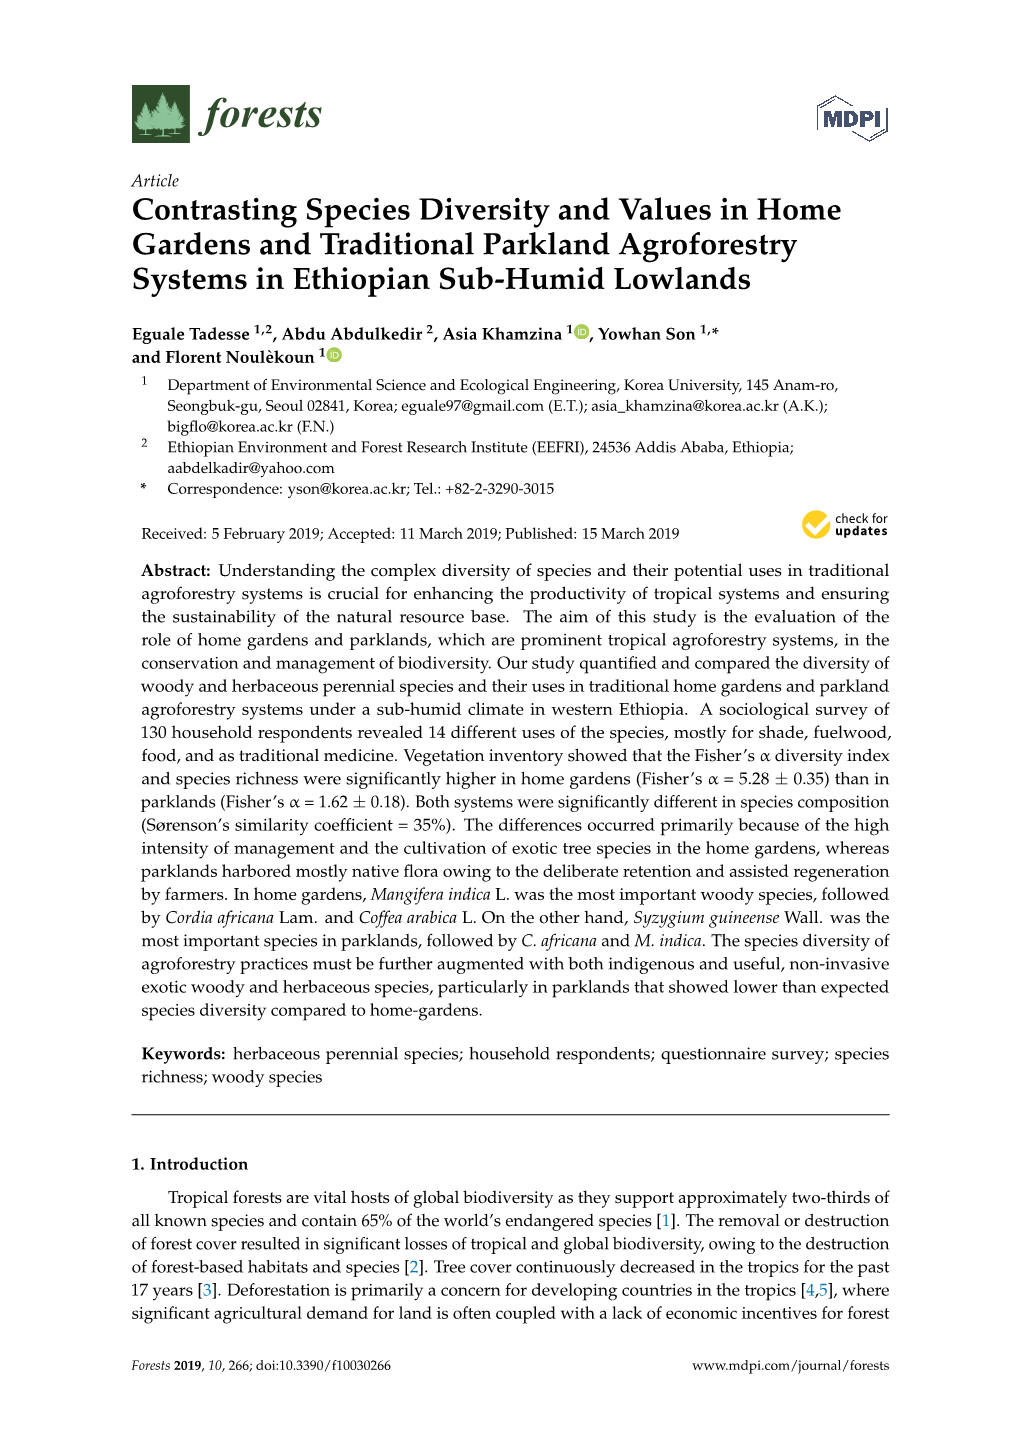 Contrasting Species Diversity and Values in Home Gardens and Traditional Parkland Agroforestry Systems in Ethiopian Sub-Humid Lowlands